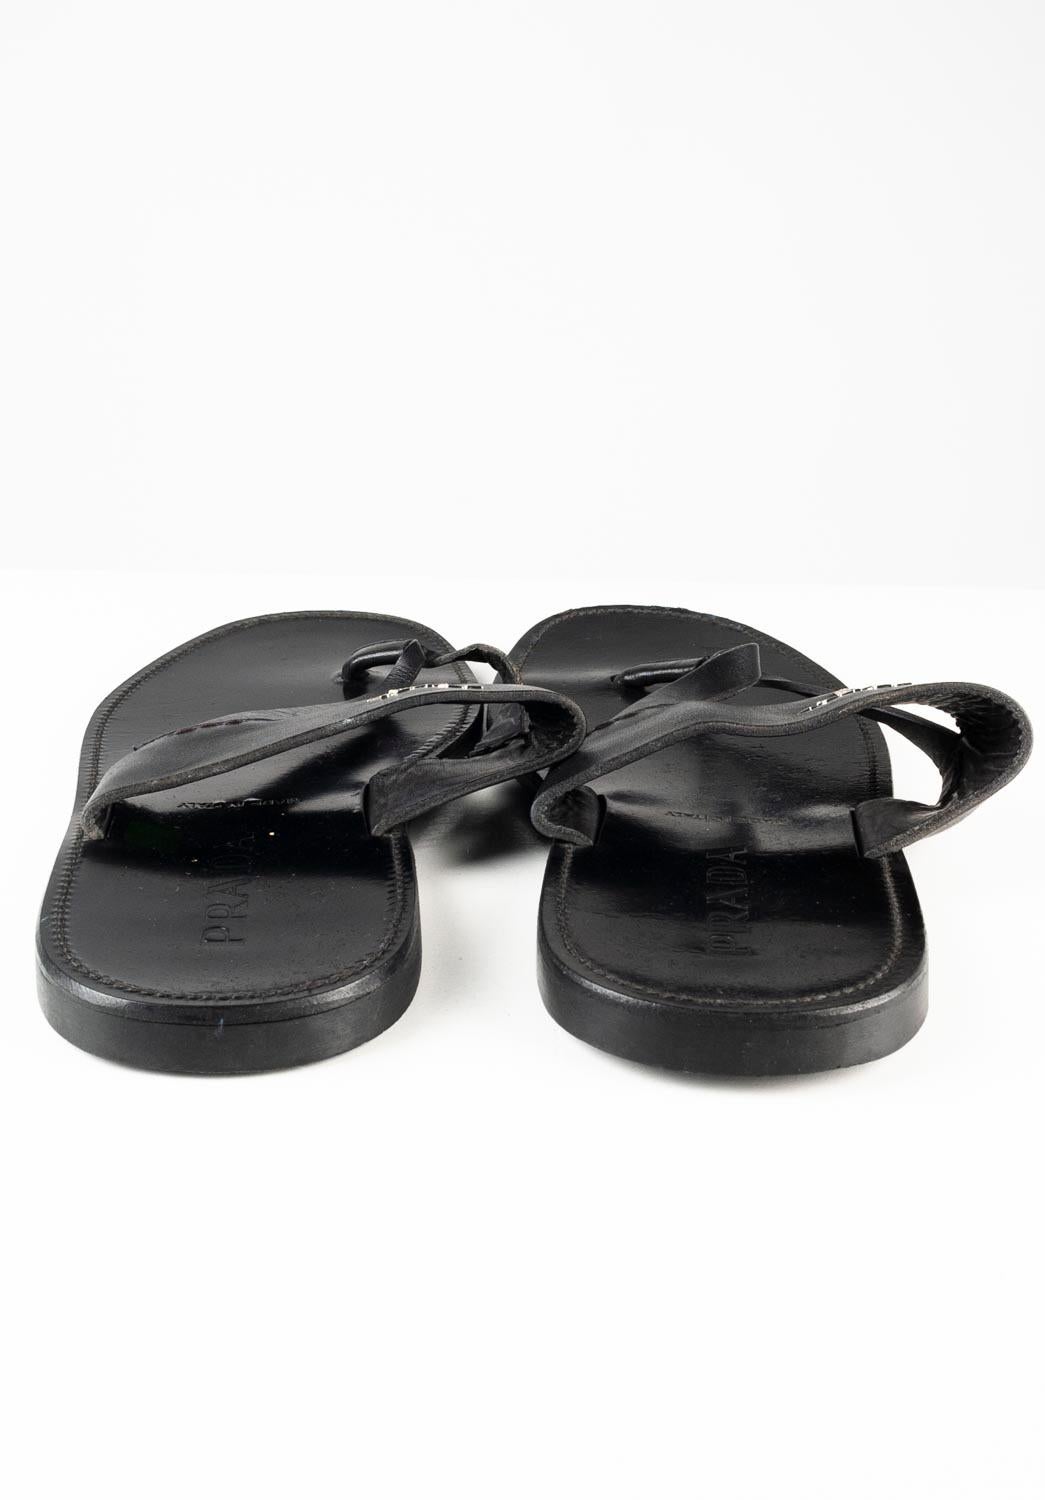 Prada Slippers Leather Sandals Men Shoes Size UK7 EUR41, USA 8, S614 For Sale 1